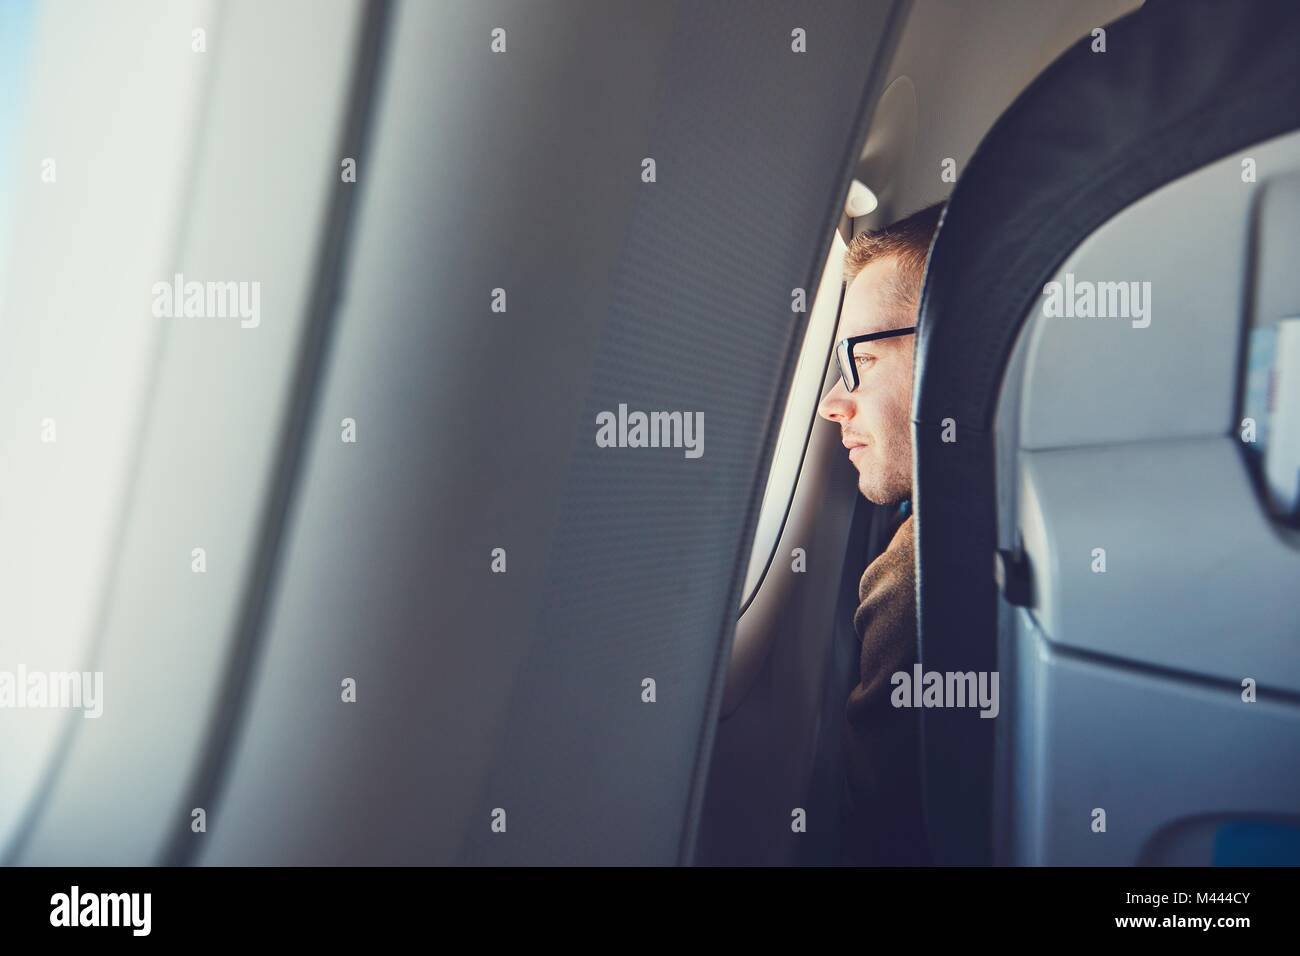 Comfortable traveling by airplane. Young man (traveler) with eyeglasses looking from window during flight. Stock Photo